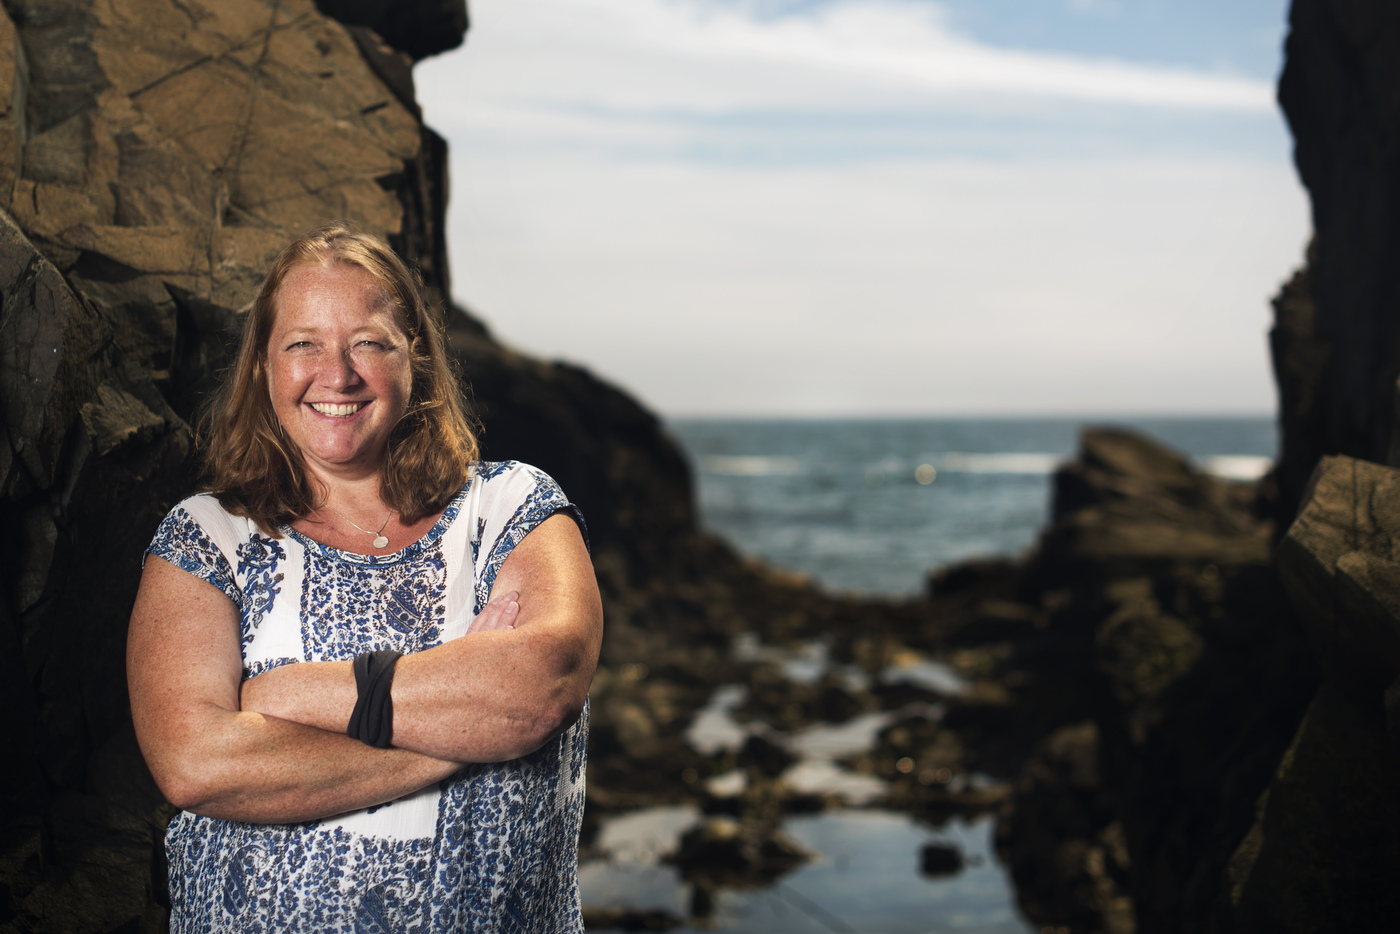 Jennifer Bowen, Associate professor in the Department of Marine and Environmental Sciences, poses for a portrait at the Marine Science Center campus in Nahant, Massachusetts